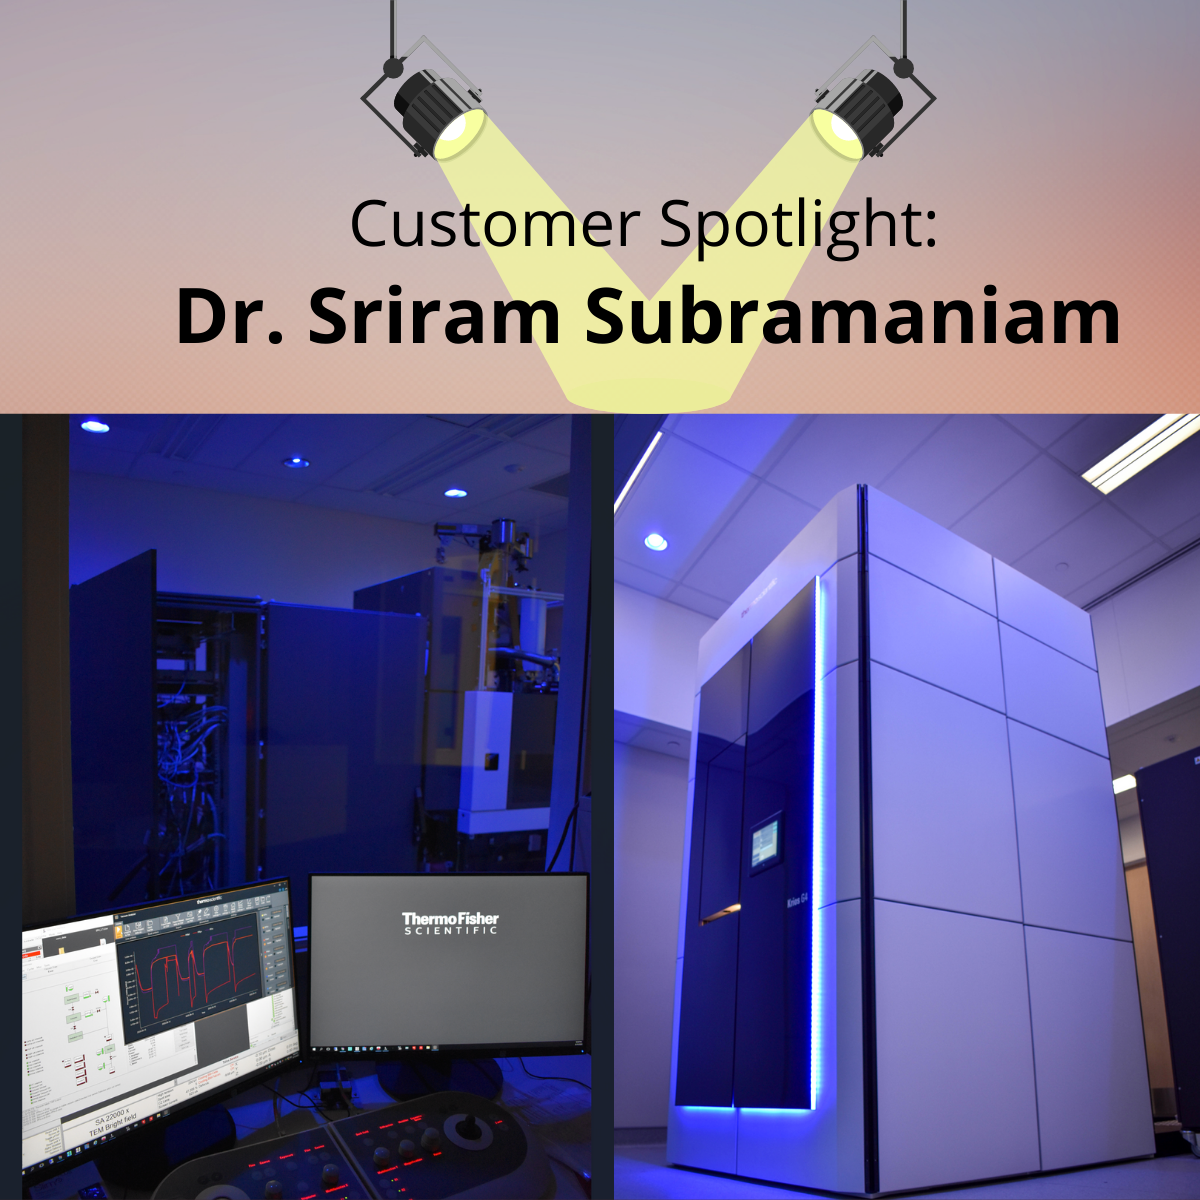 Dr. Sriram Subramaniam, recently welcomed a Thermo Fisher Scientific Glacios Cryo-TEM and Krios G4 Krios-TEM